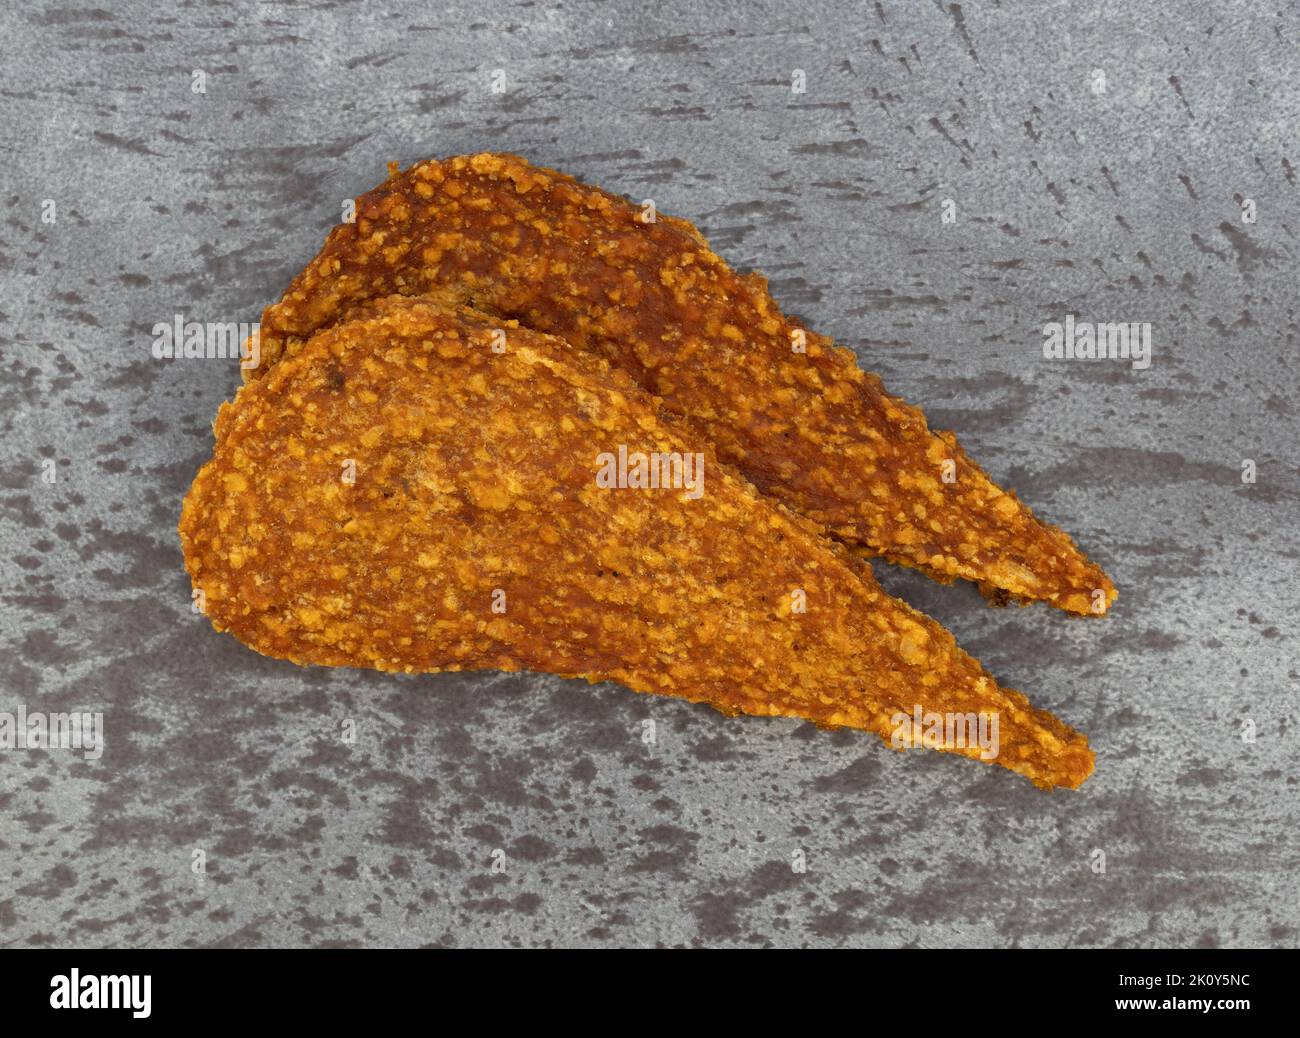 Overhead view of two slices of duck jerky on a gray mottled countertop. Stock Photo